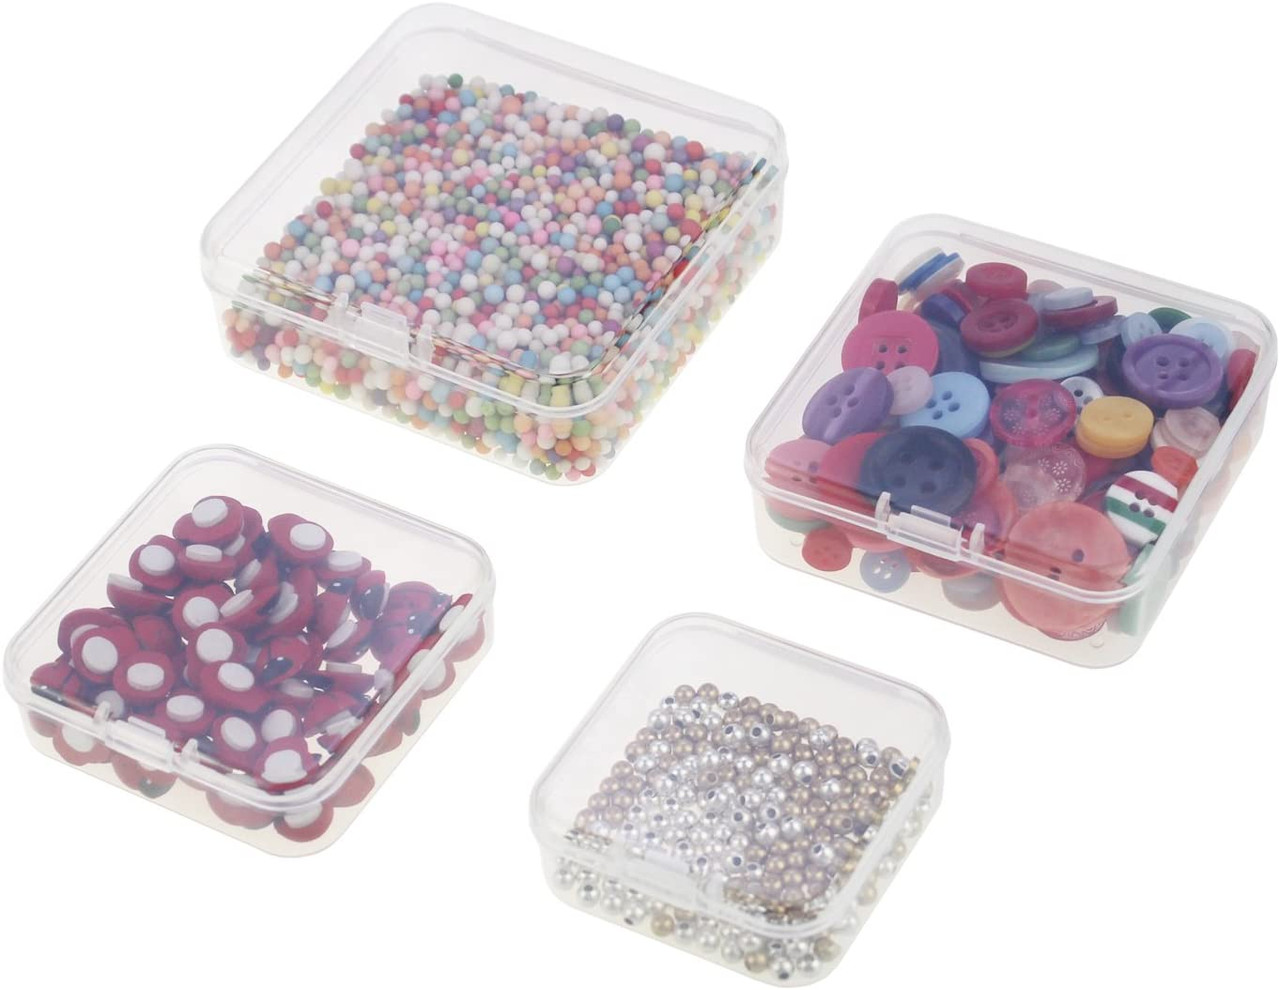 LJY 28 Pieces Mixed Sizes Rectangular Empty Mini Plastic Storage Containers  with Lids - LJY Technology Inc Official Website